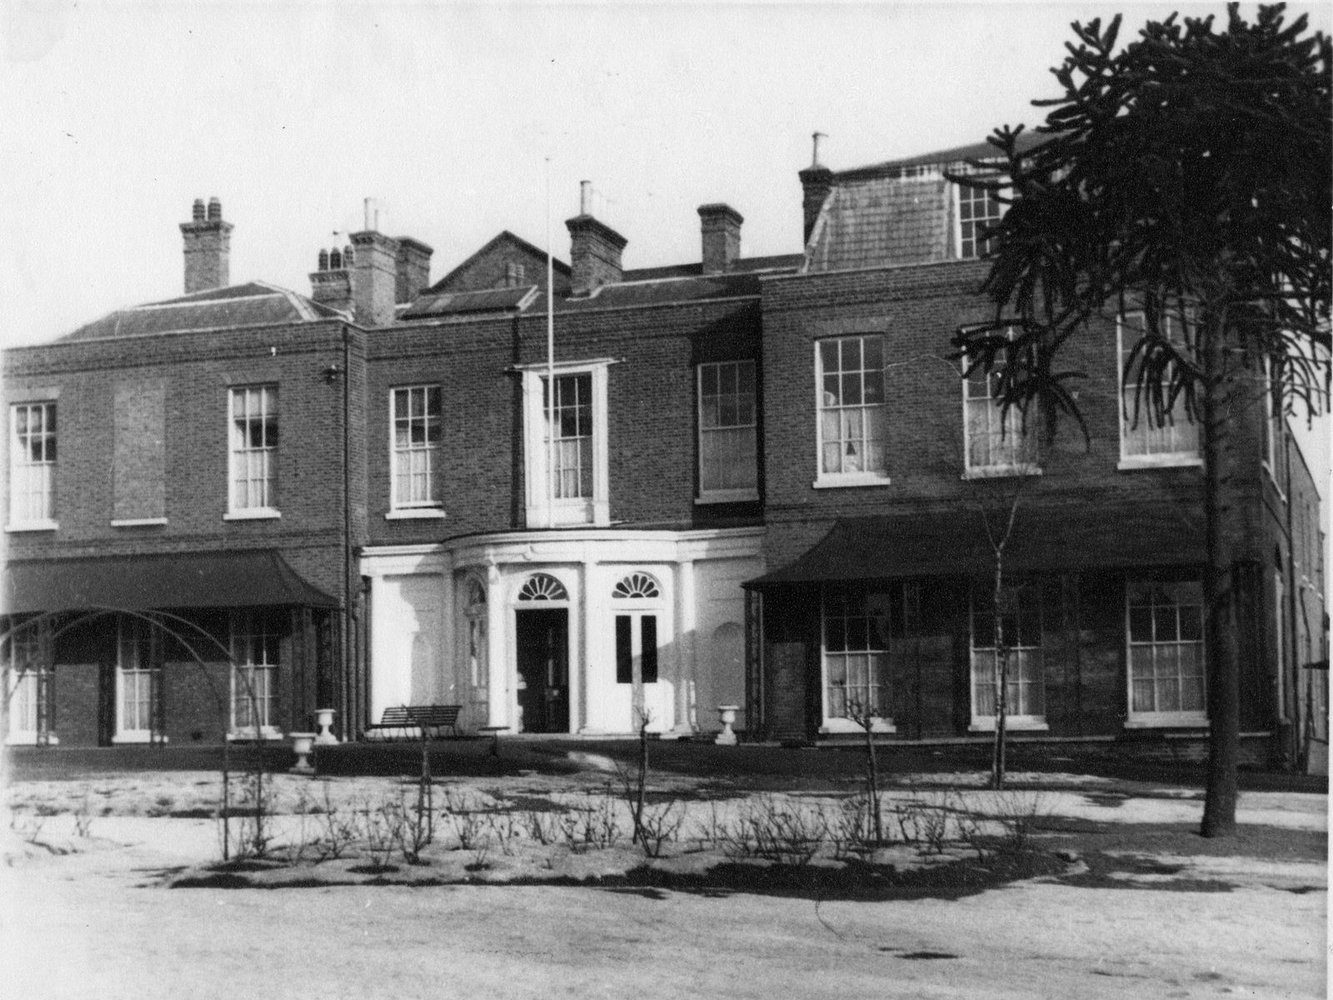 Millfield House in the 1950's